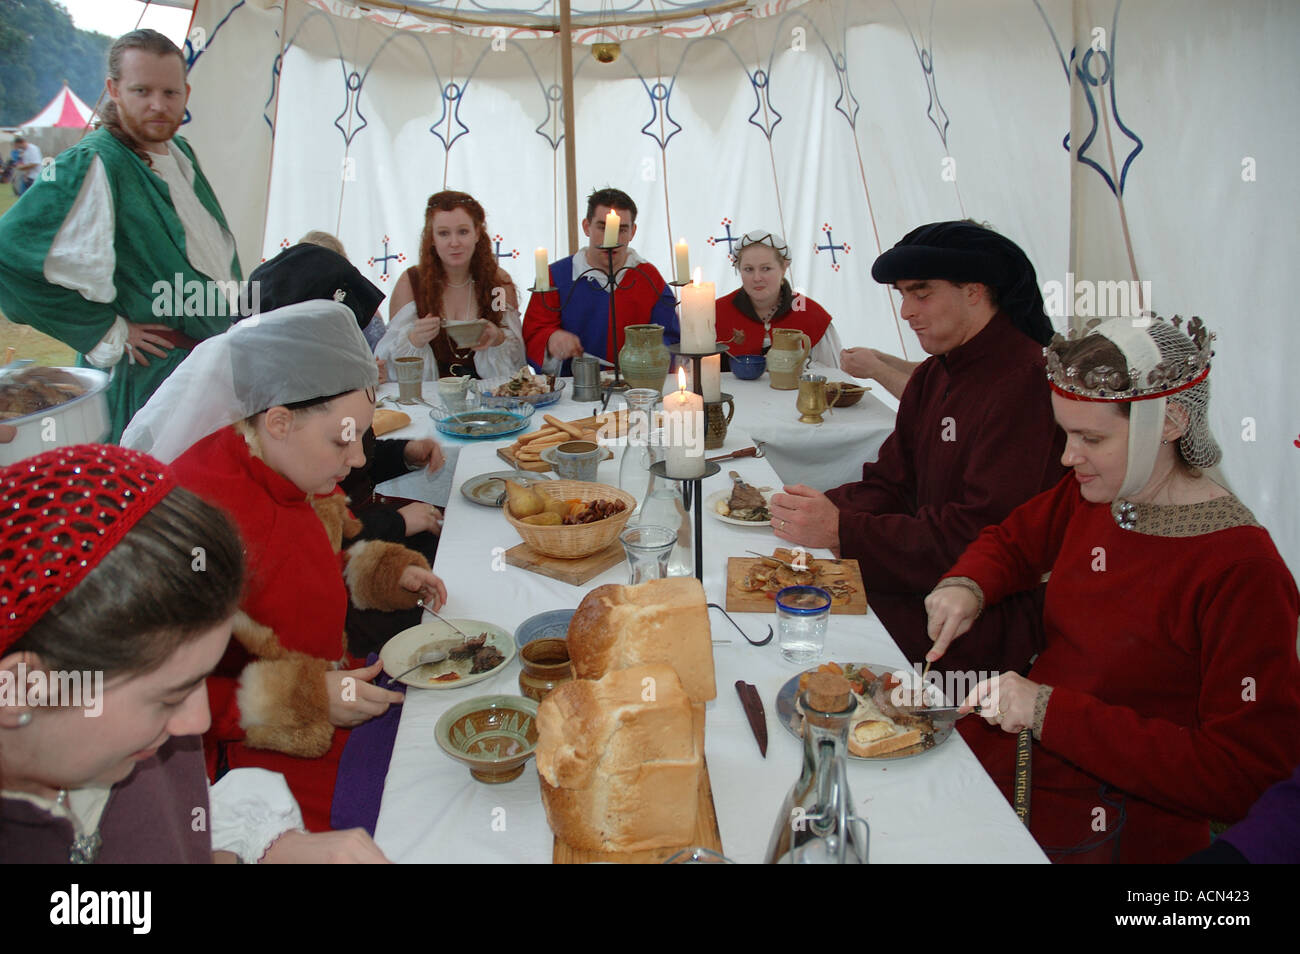 Formal meal in Medieval feasting in tent camp encampment dsc 1401 Stock Photo